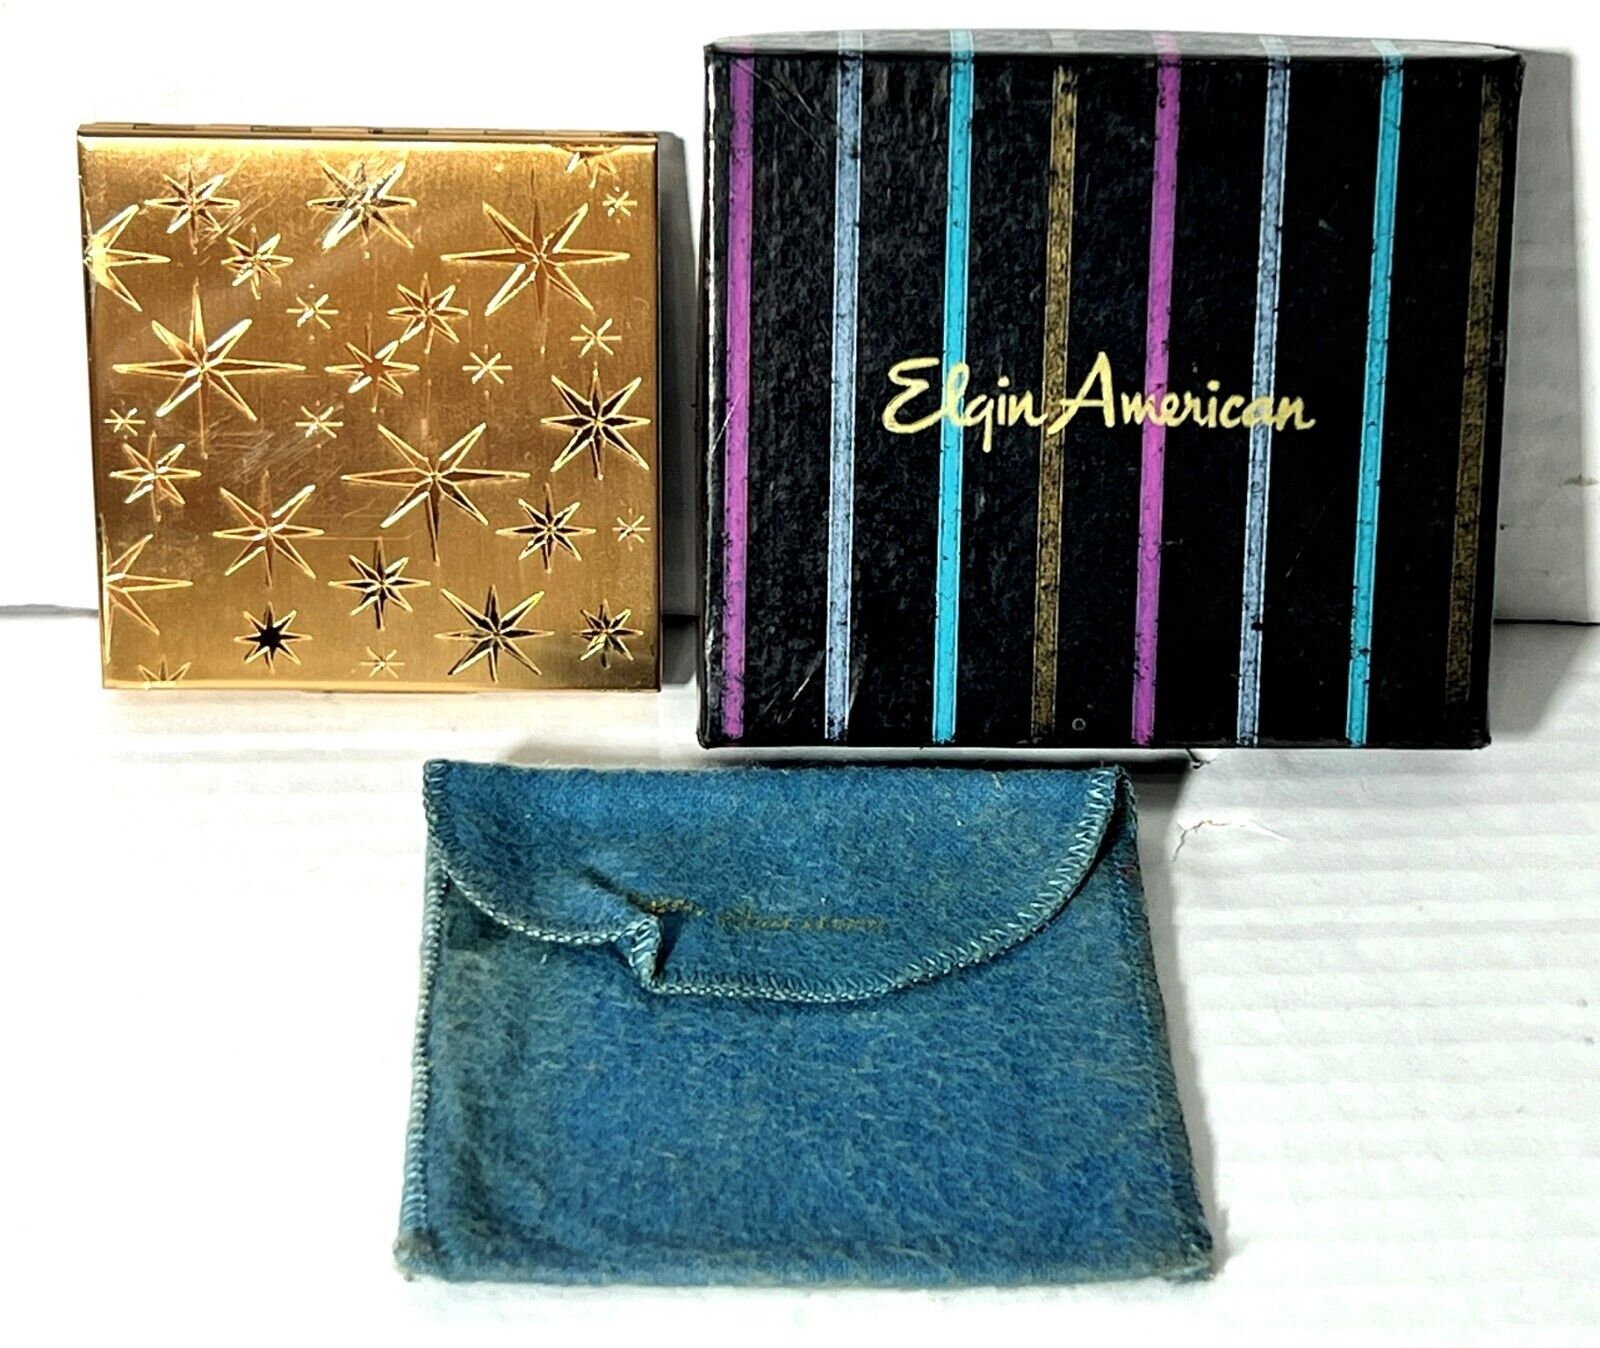 VTG Elgin American Gold-Toned Etched Star Square Powder Mirror Compact Pouch Box